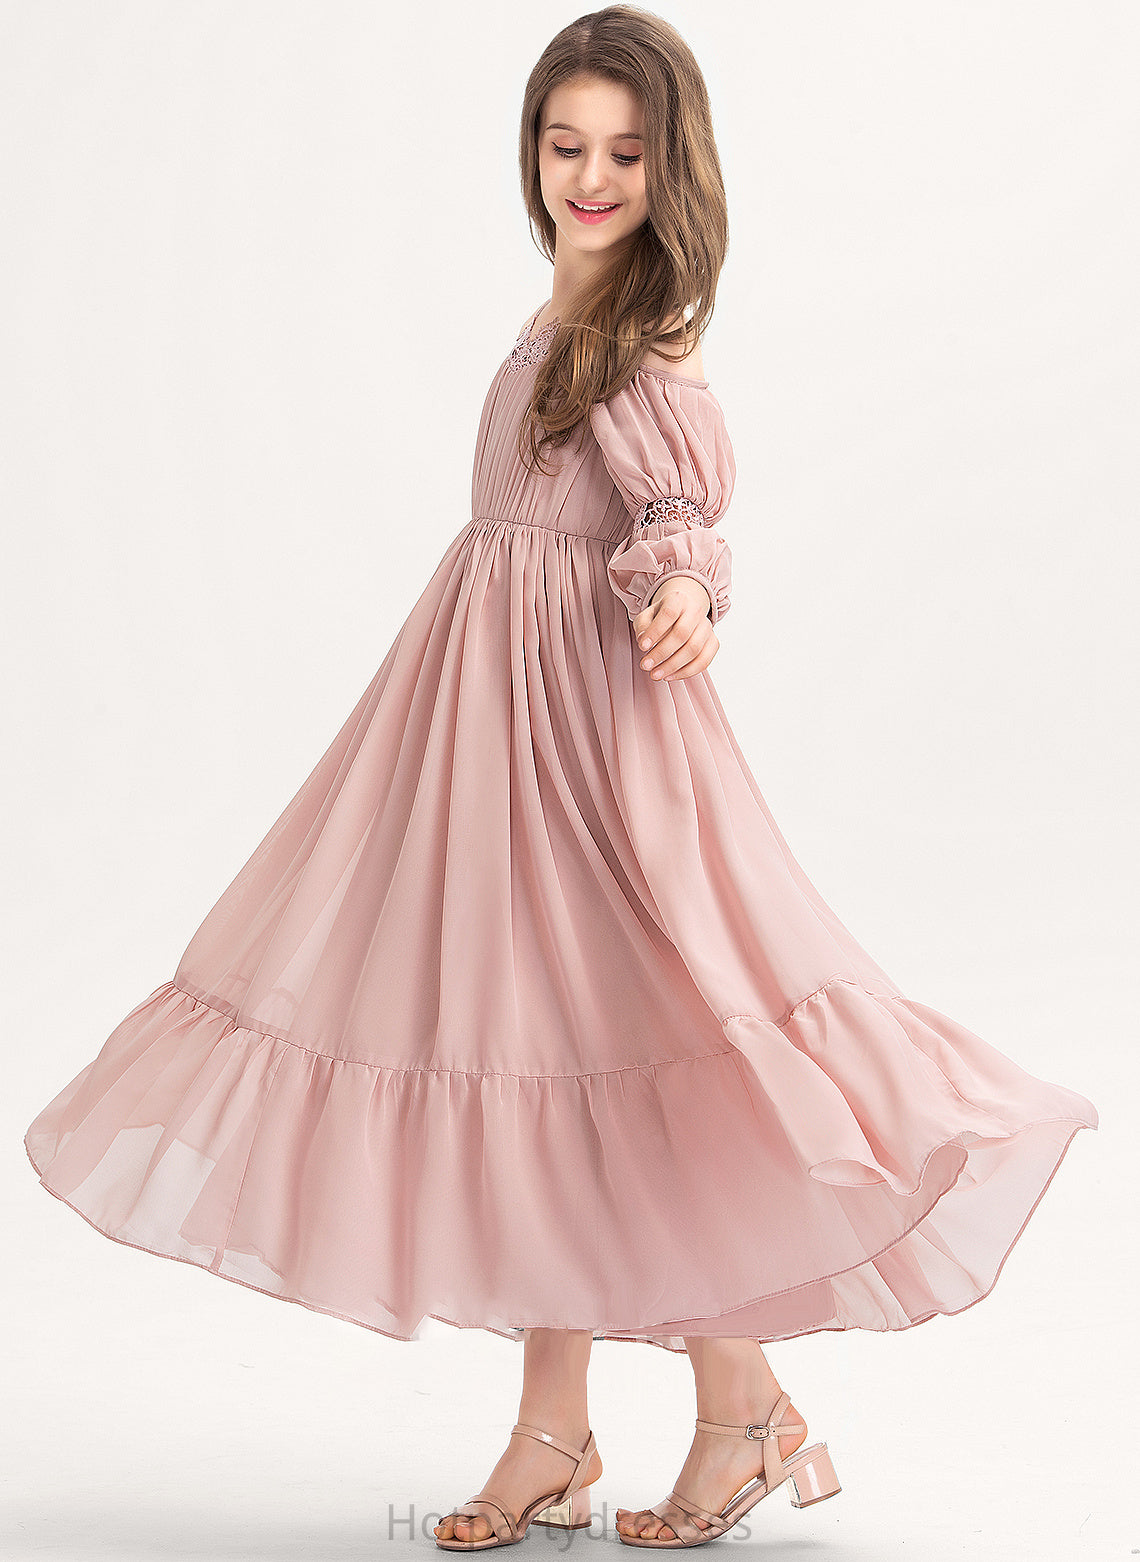 Lace Junior Bridesmaid Dresses Ankle-Length With Ruffle Chiffon A-Line Square Neckline Shelby